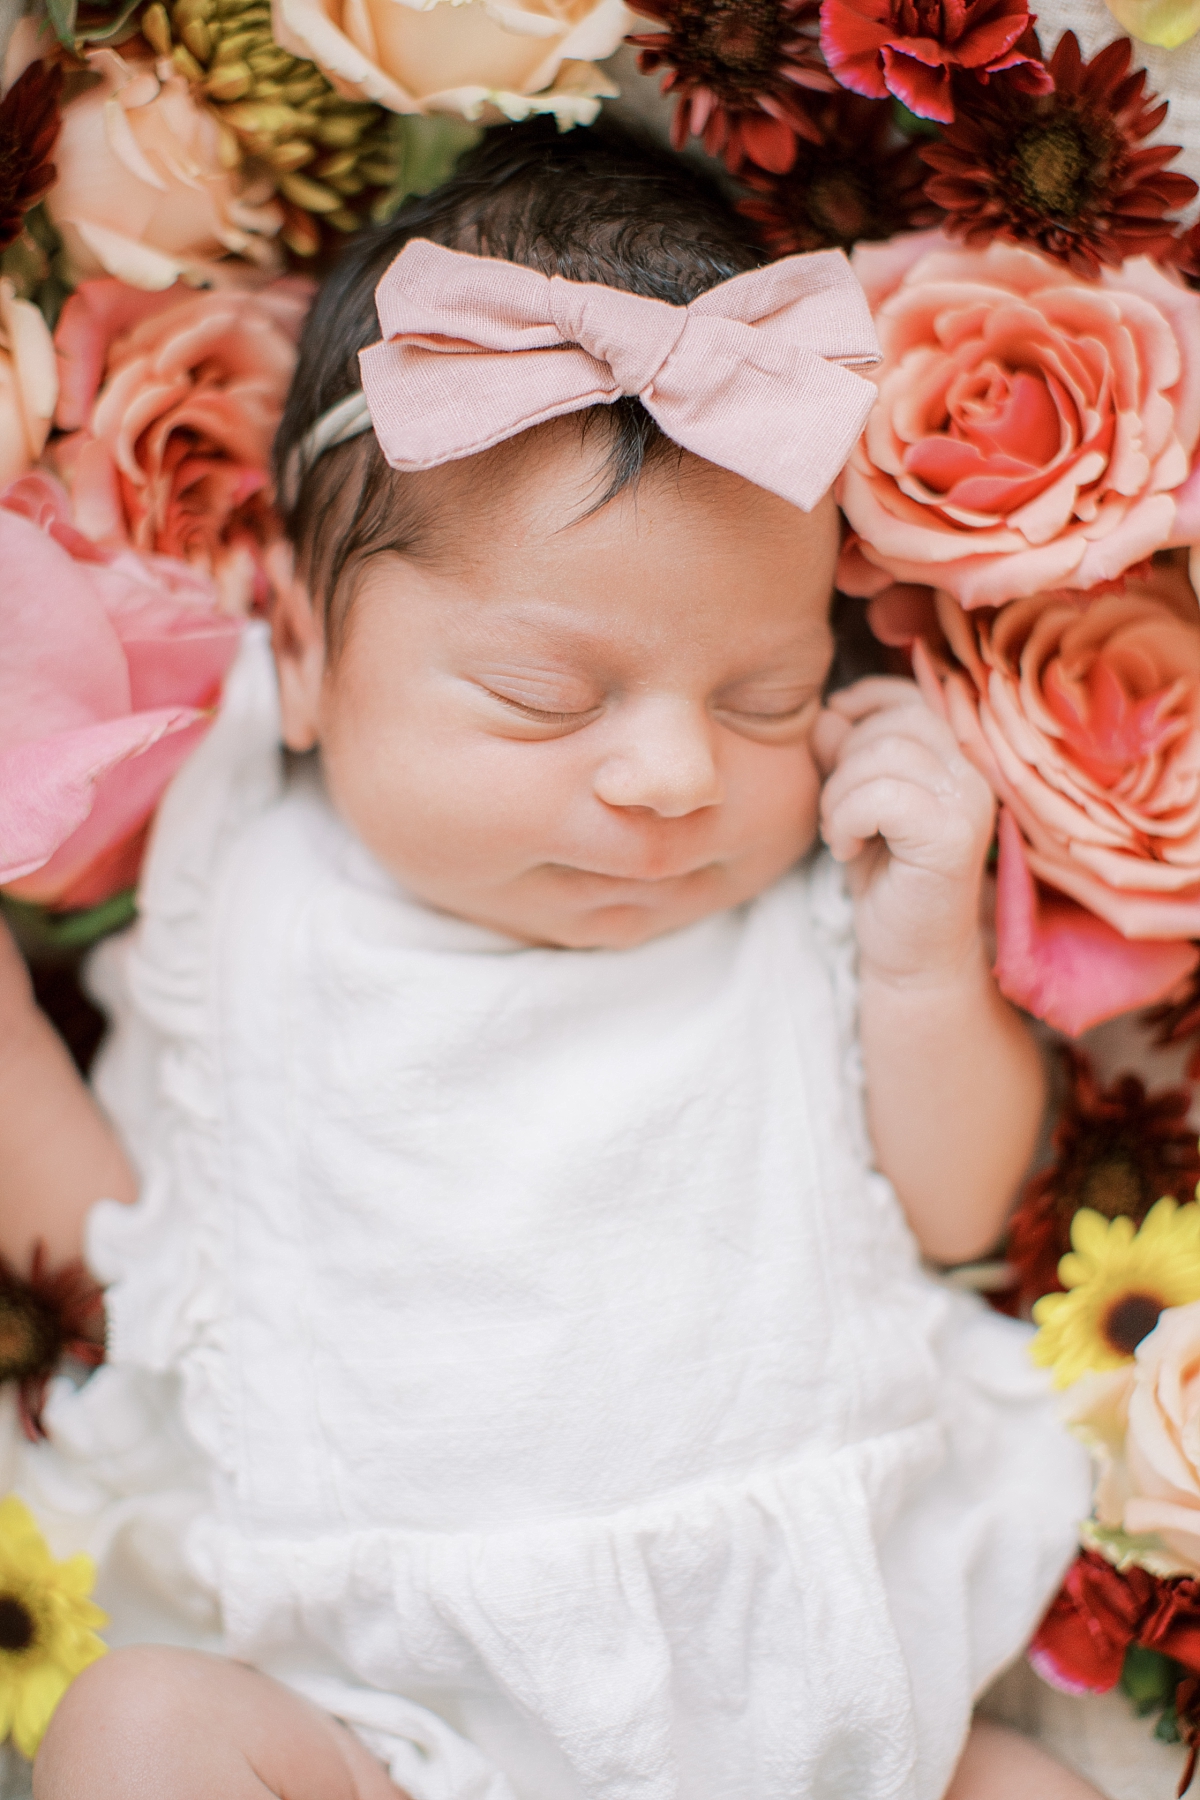 Lancaster, PA newborn photography session in studio with flowers